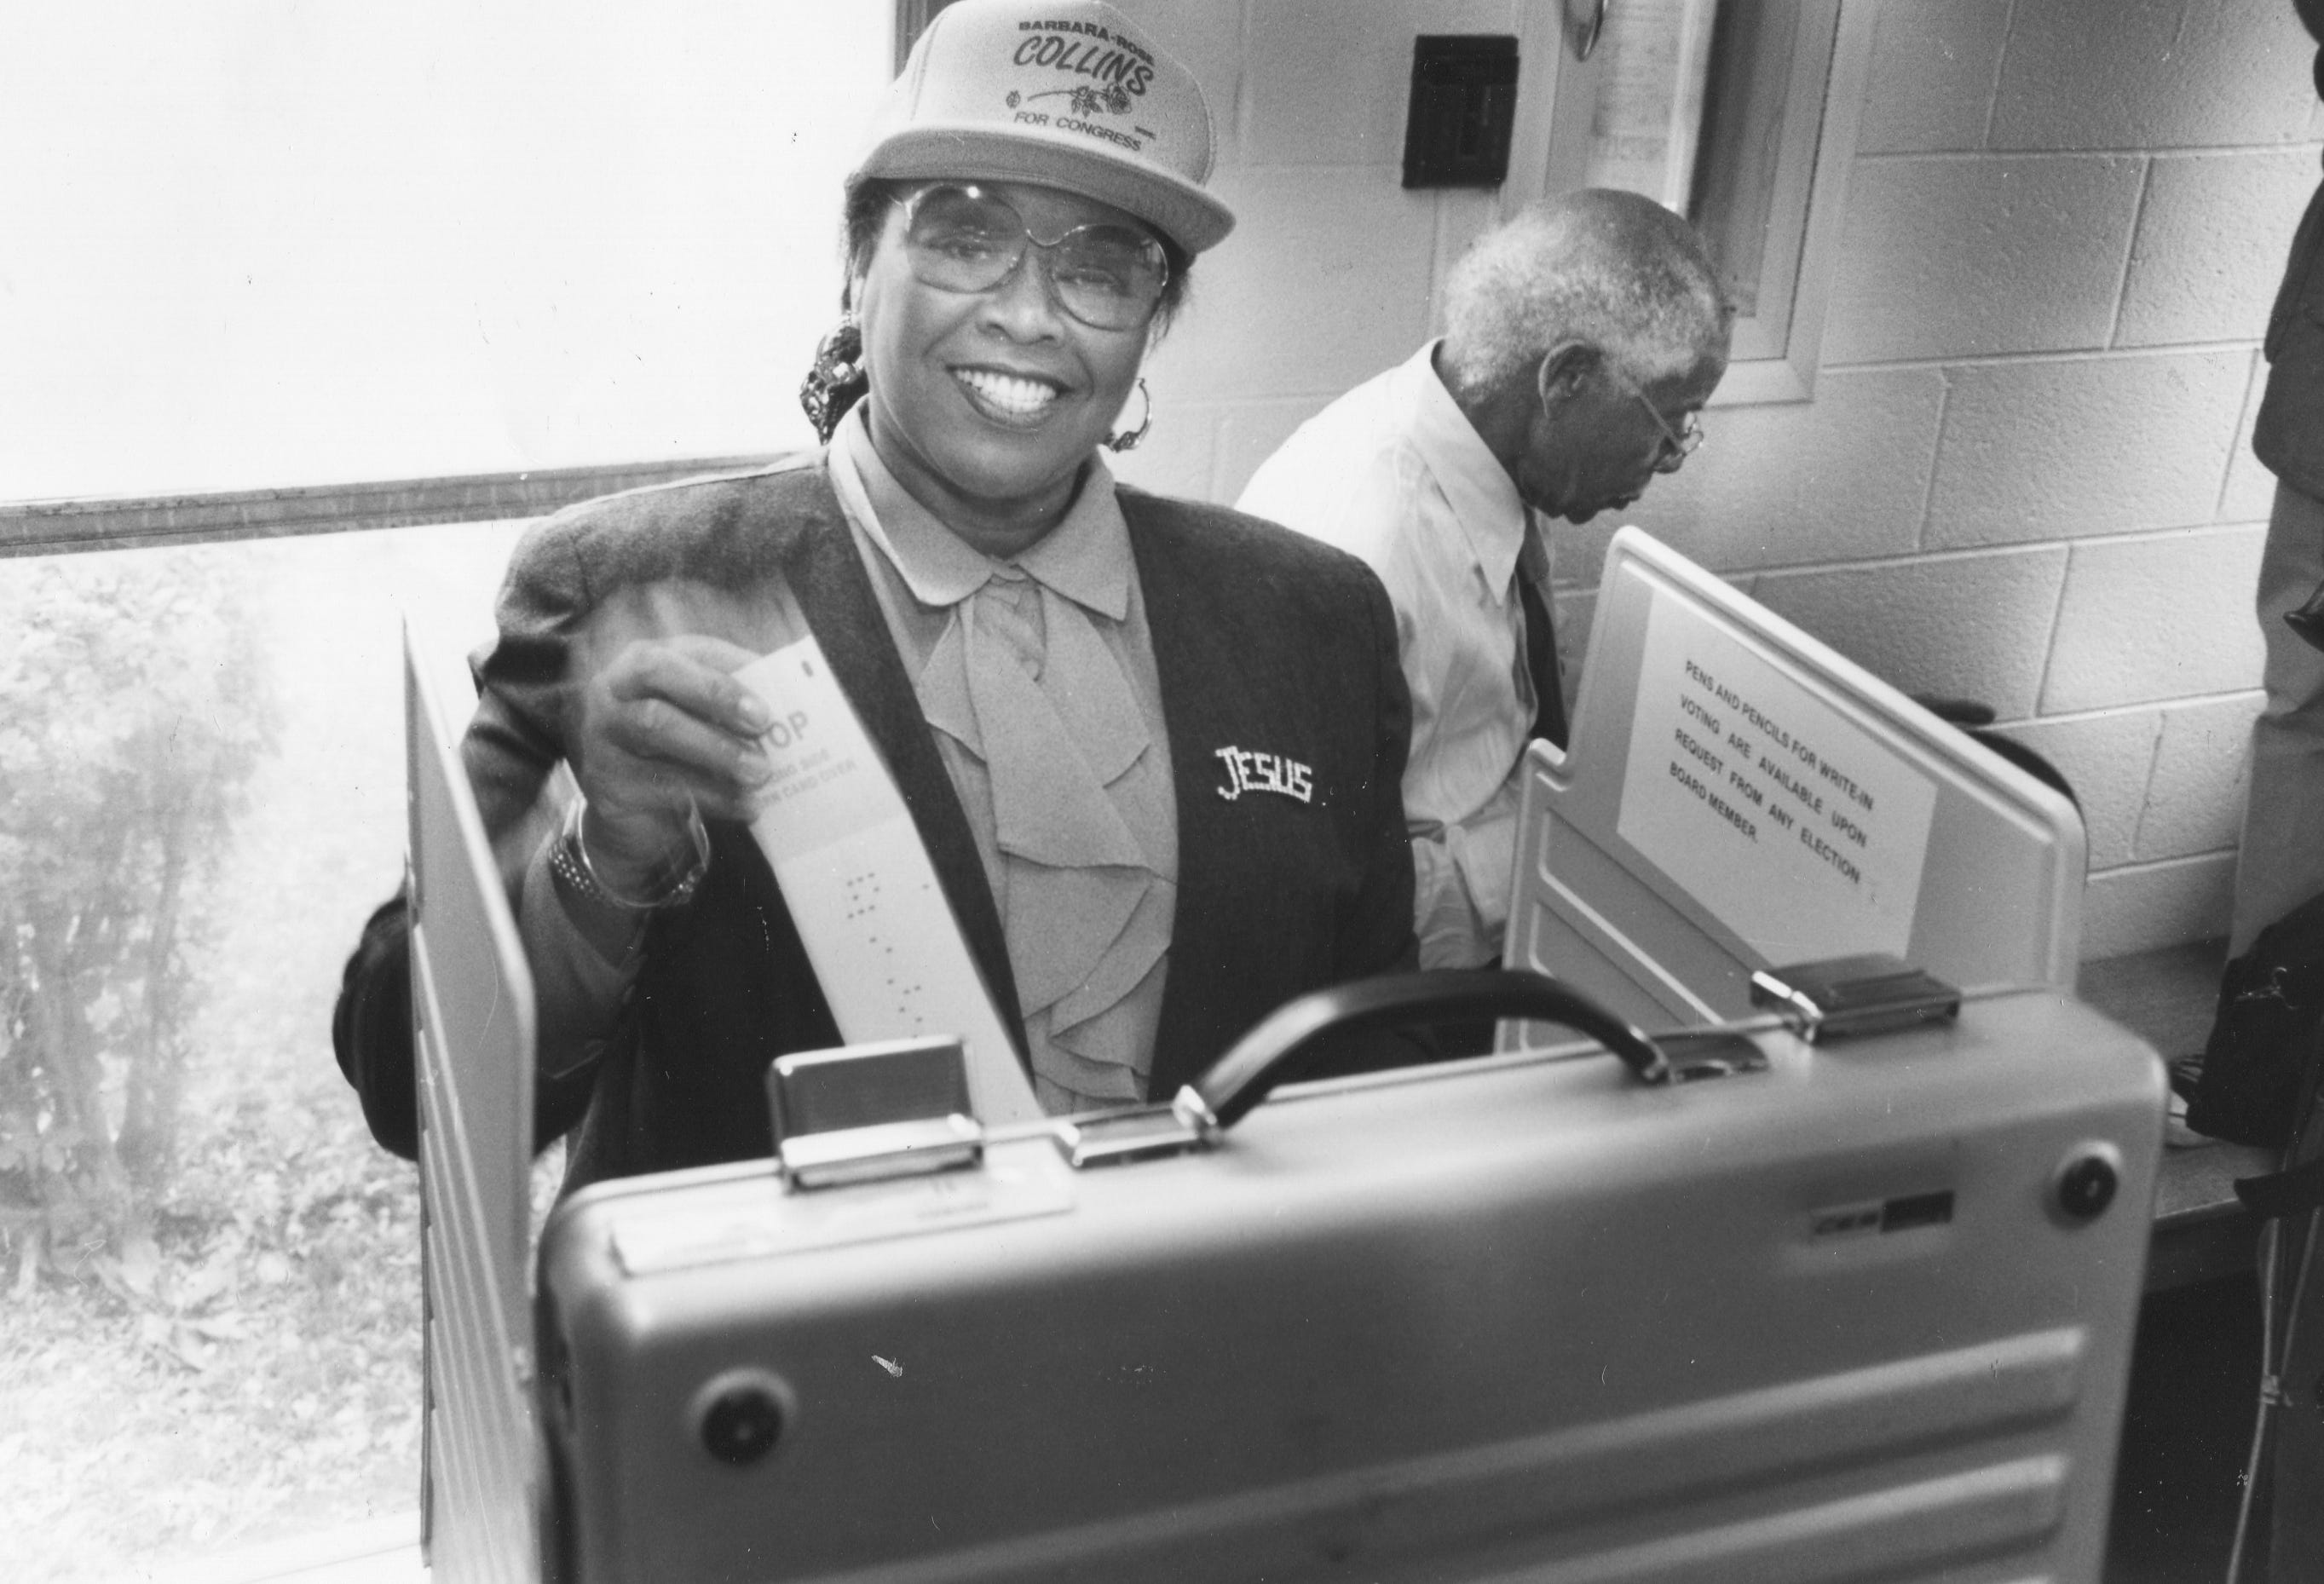 Longtime community activist and Detroit Congresswoman Barbara-Rose Collins, seen here voting in an April 24, 1991 photo, died at the age of 82, her family announced in a statement on Thursday, Nov. 4, 2021. Collins was elected to the U.S. House in 1990, becoming the first Black woman from Michigan elected to Congress.